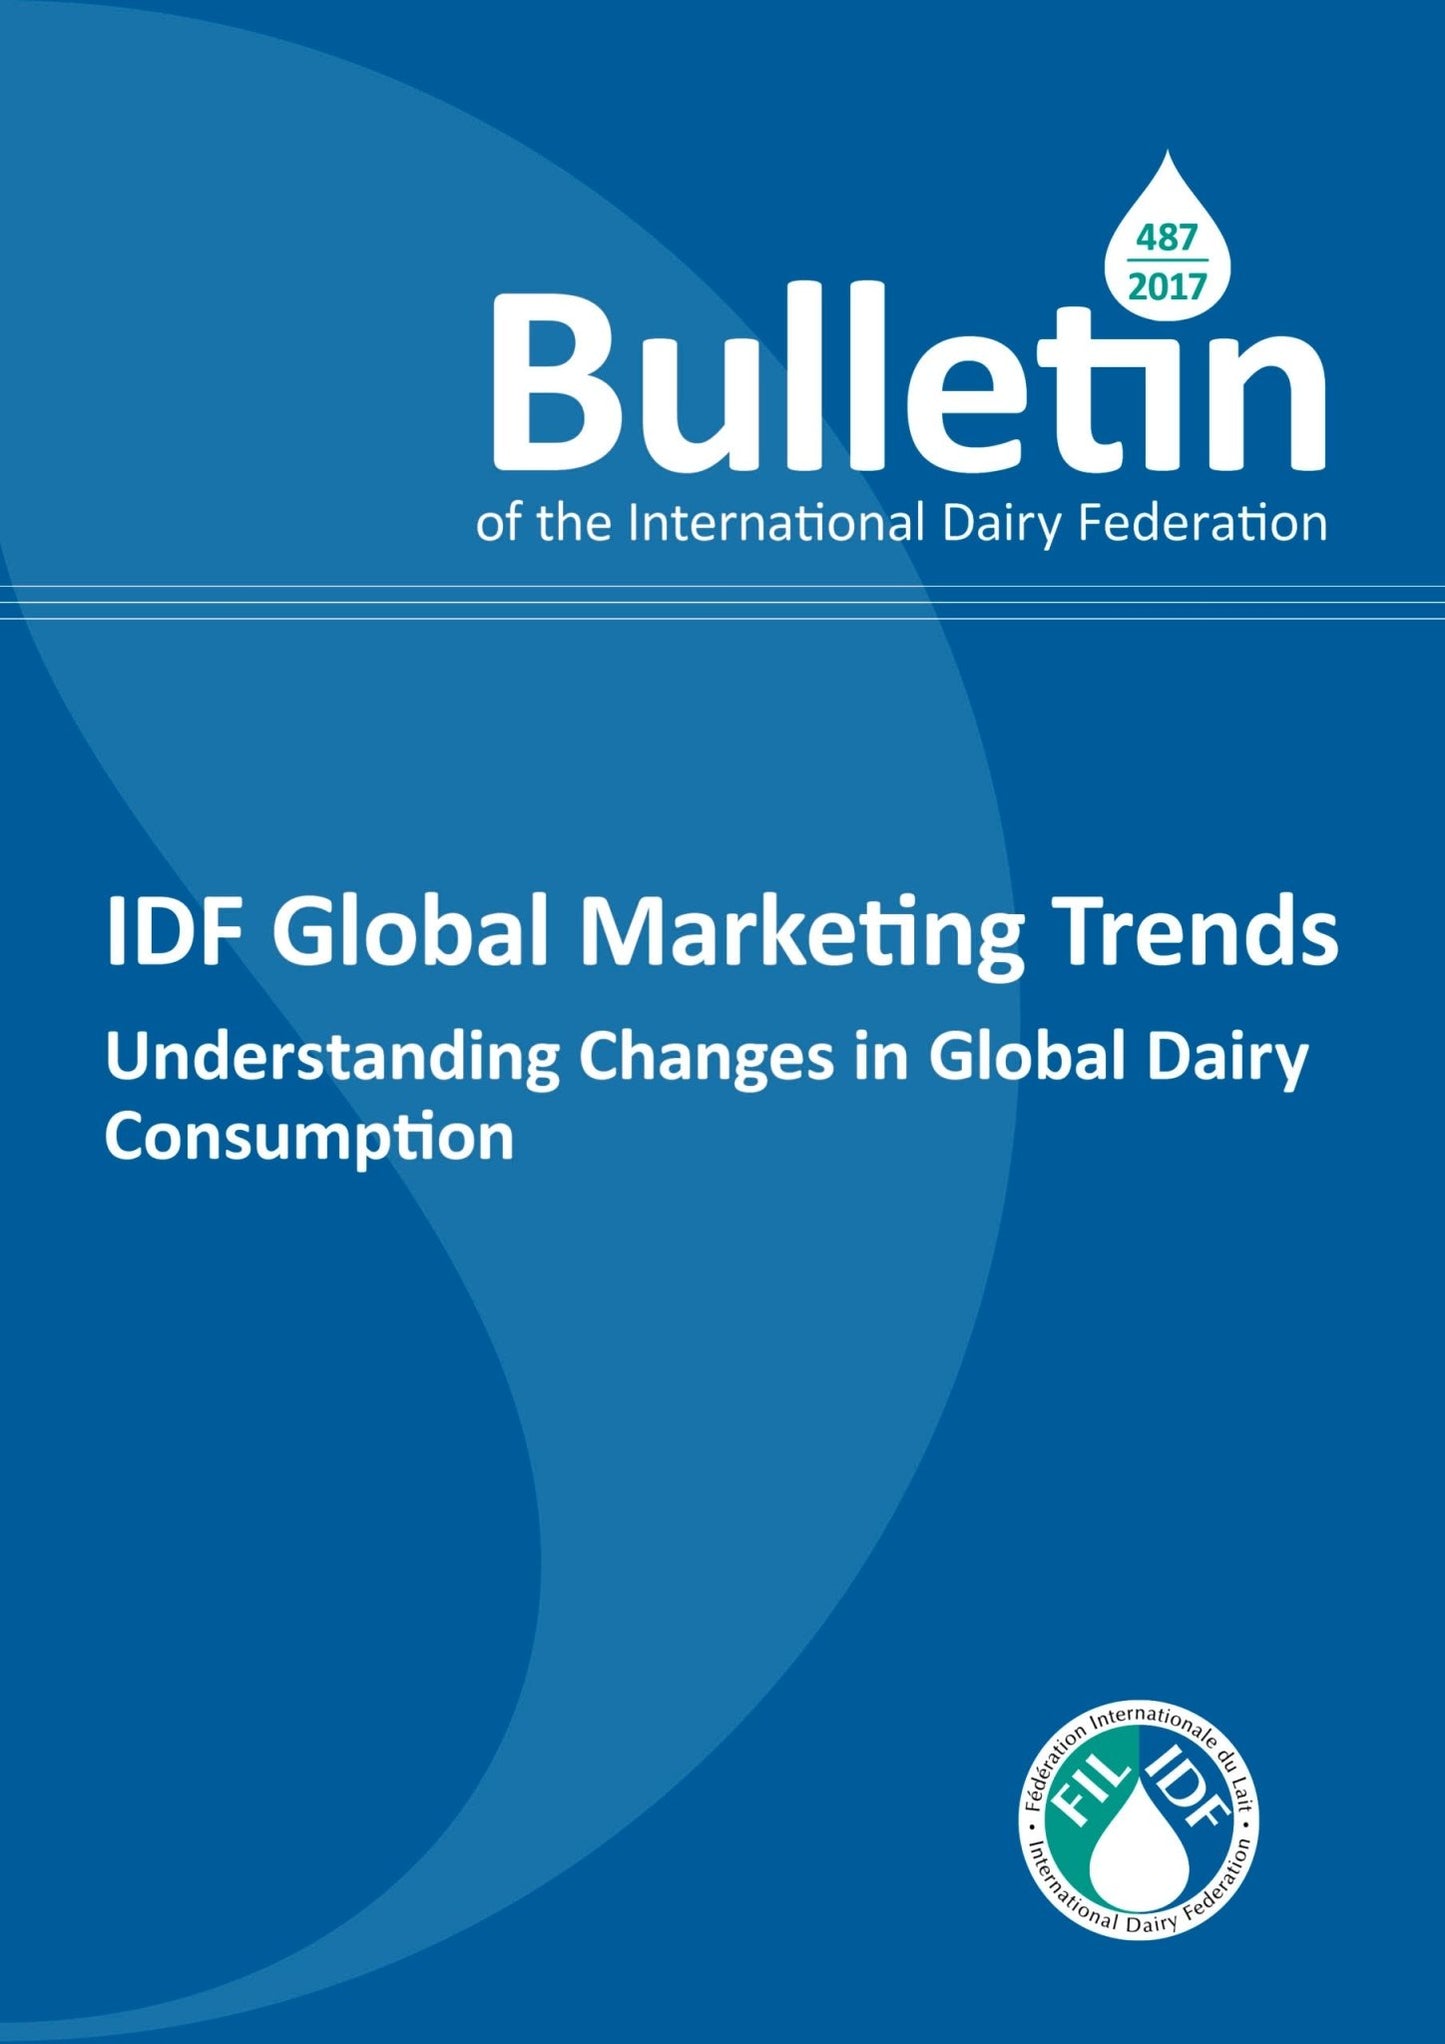 Bulletin of the IDF N° 487/2017: IDF Global Marketing Trends, Understanding Changes in Global Dairy Consumption - FIL-IDF